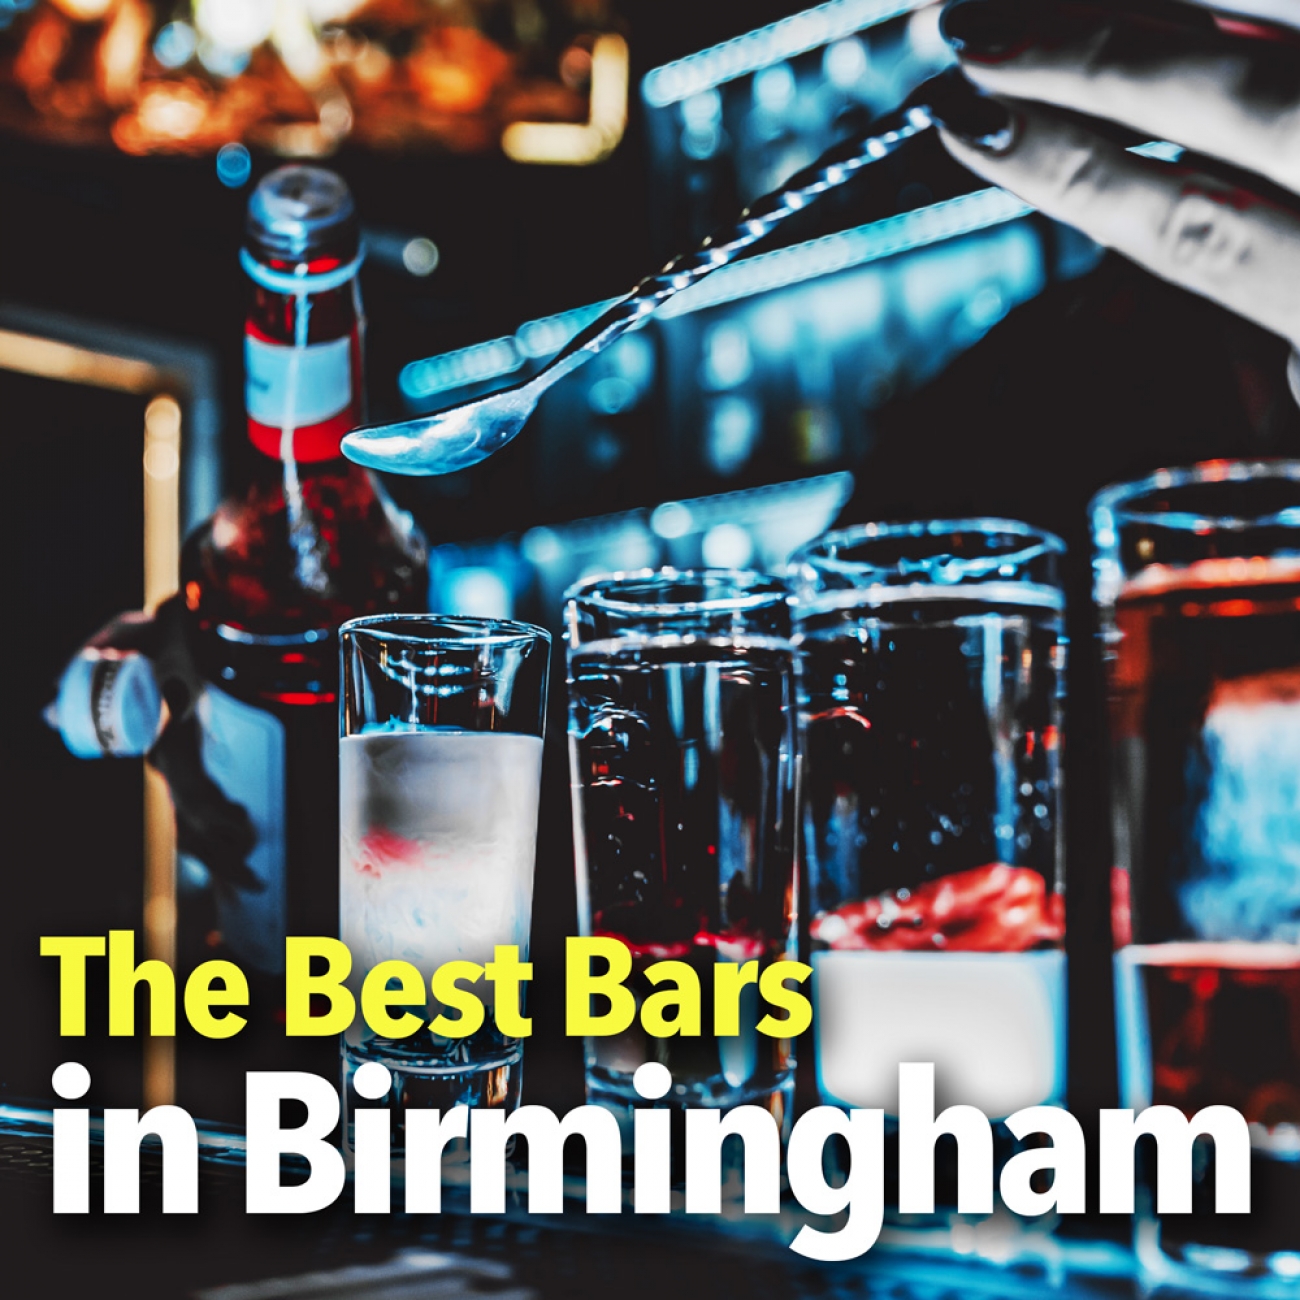 What are the Best Bars In Birmingham?